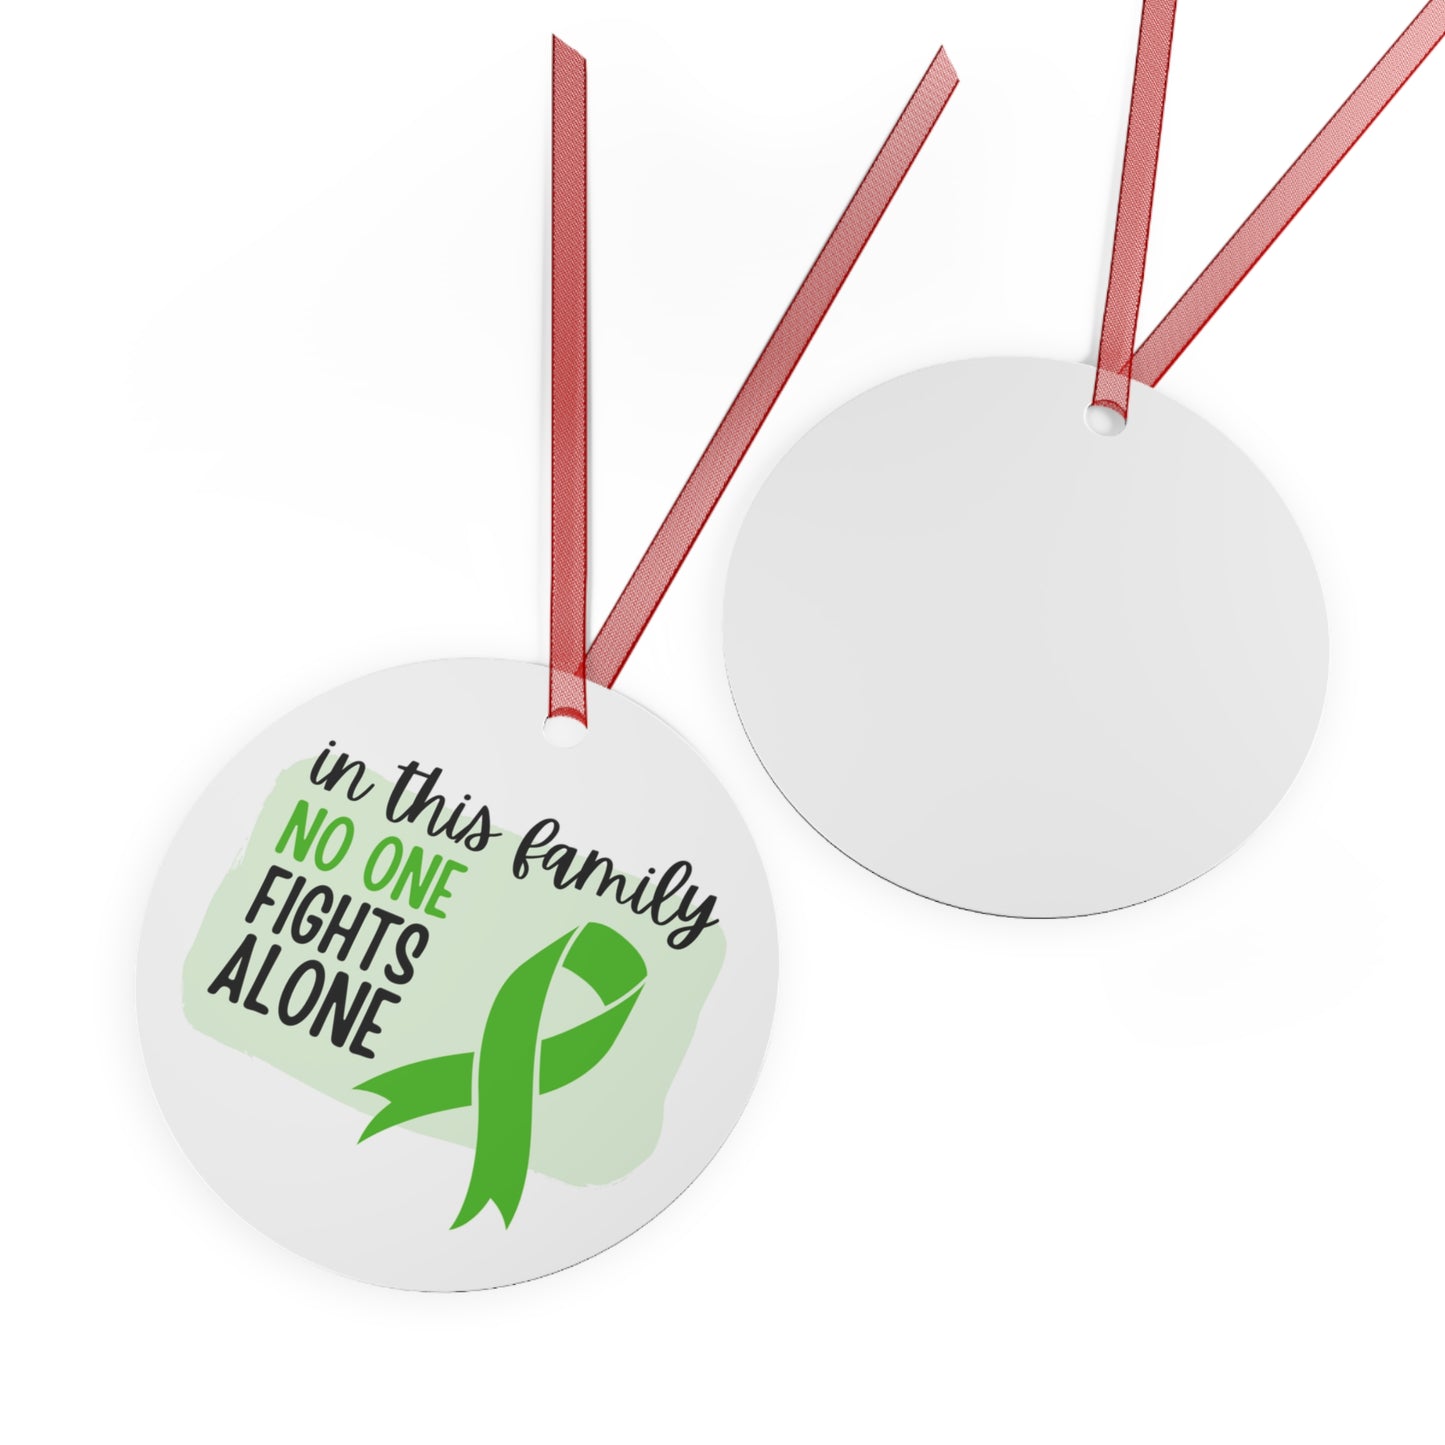 Bile Duct Cancer Ornament- Green Ribbon Awareness -In this family no one fights alone - Support for friend - Christmas Decor